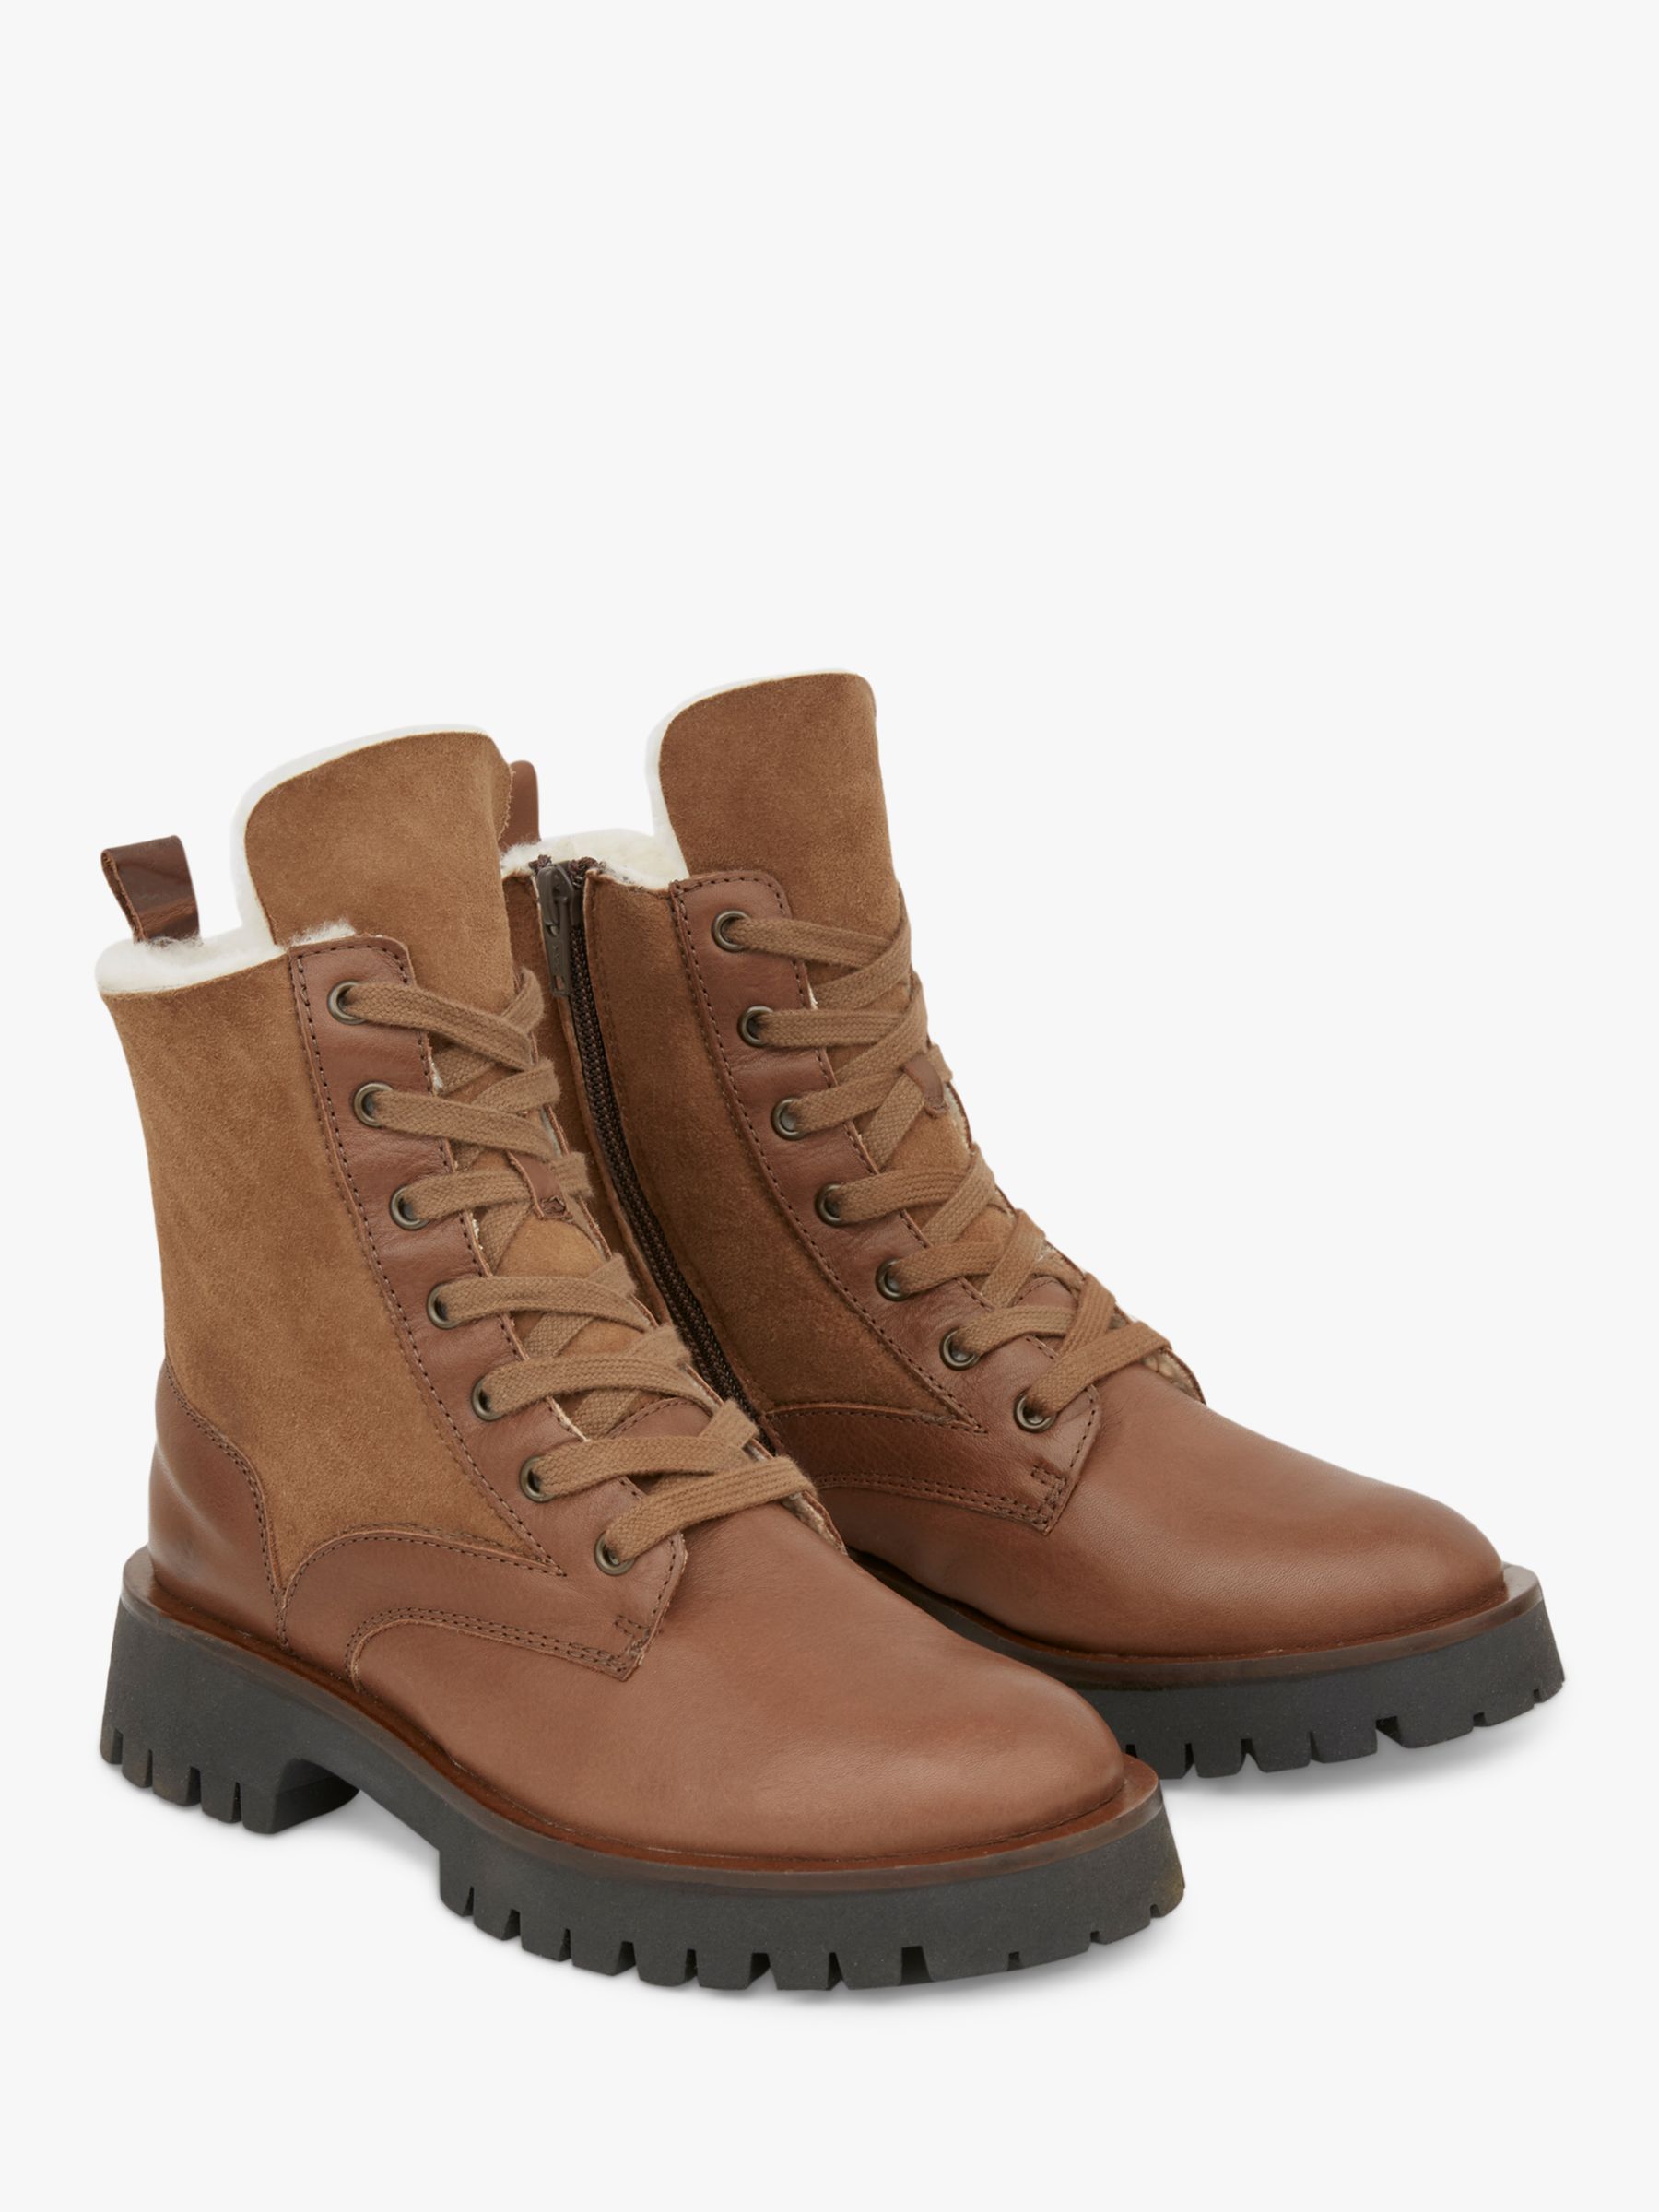 Celtic & Co. Leather And Sheepskin Wool Lace Up Boots at John Lewis ...